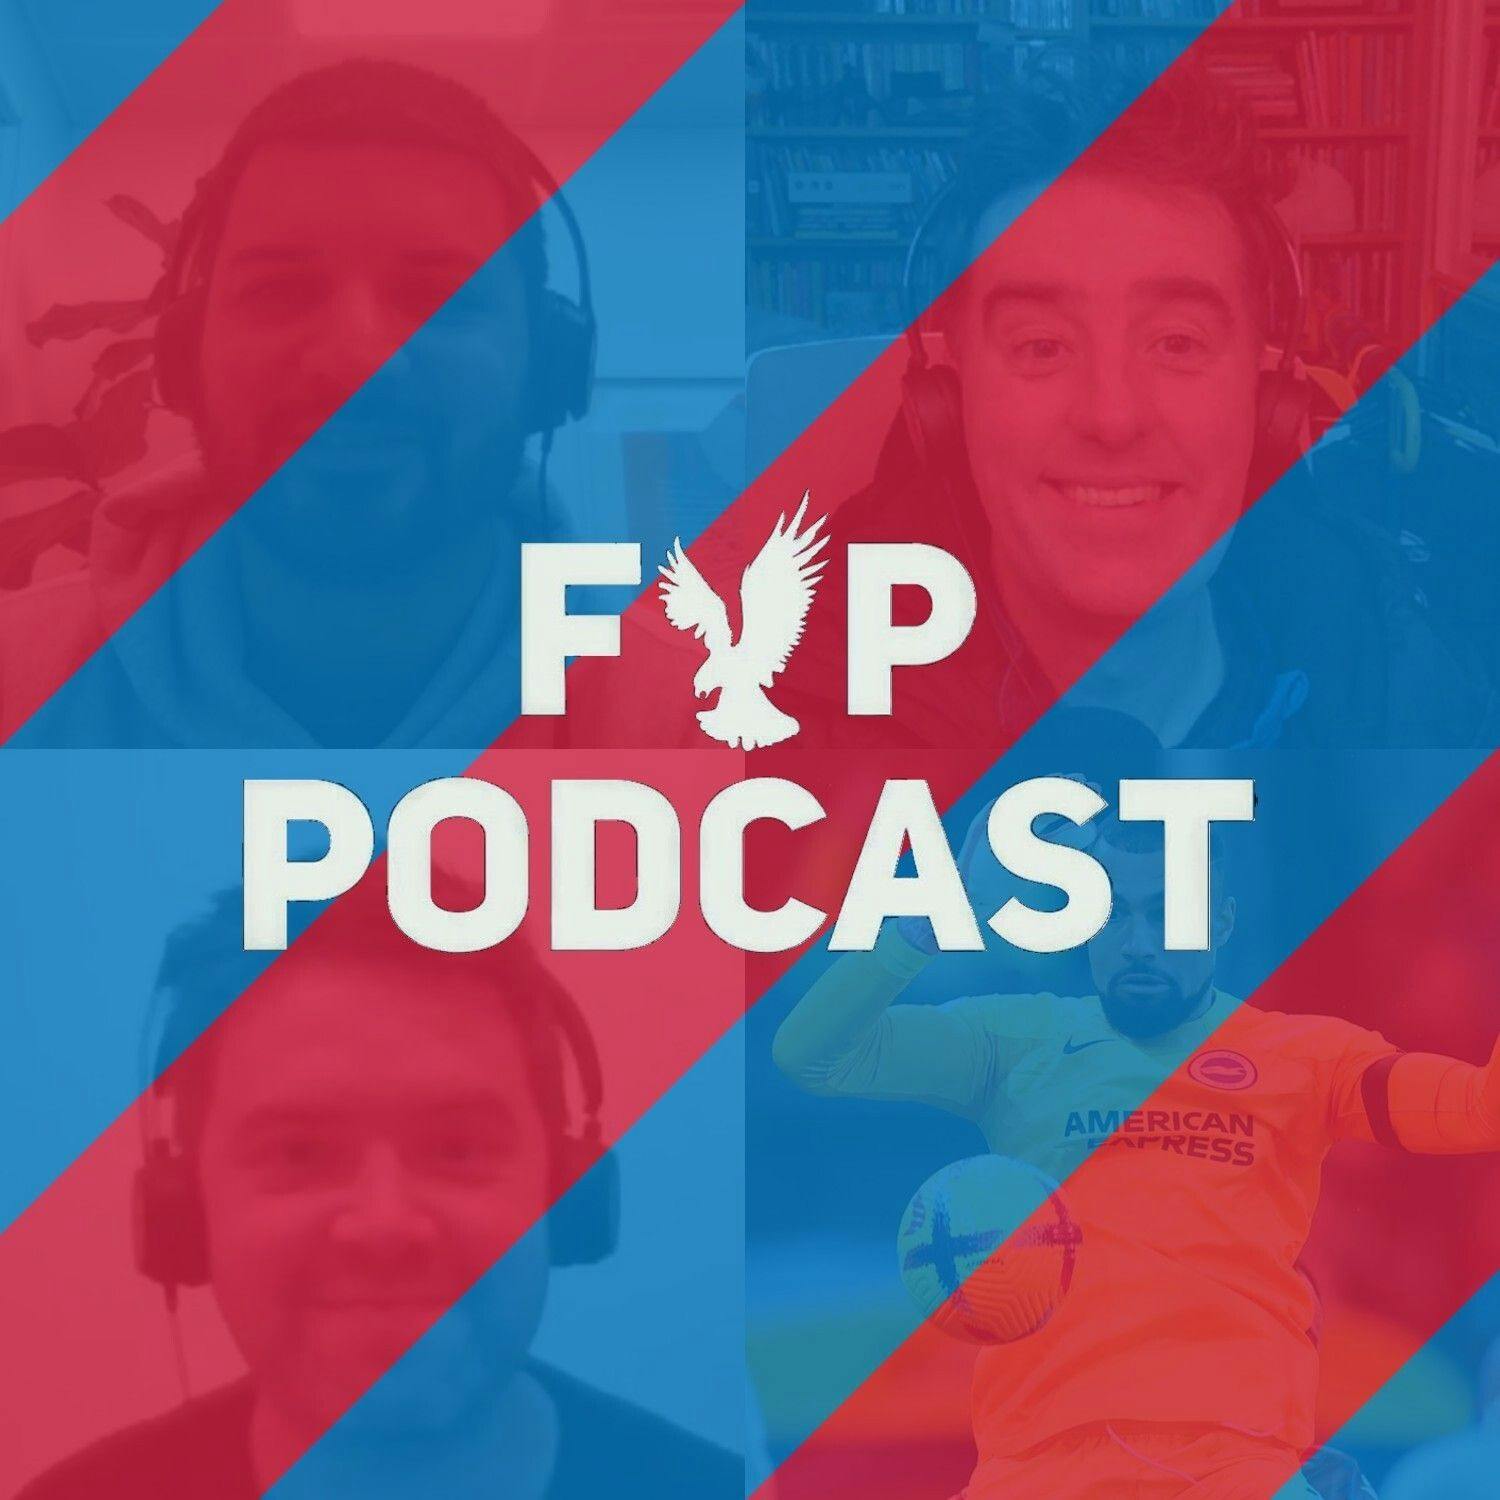 FYP Podcast 461 | Don’t Let It Bounce